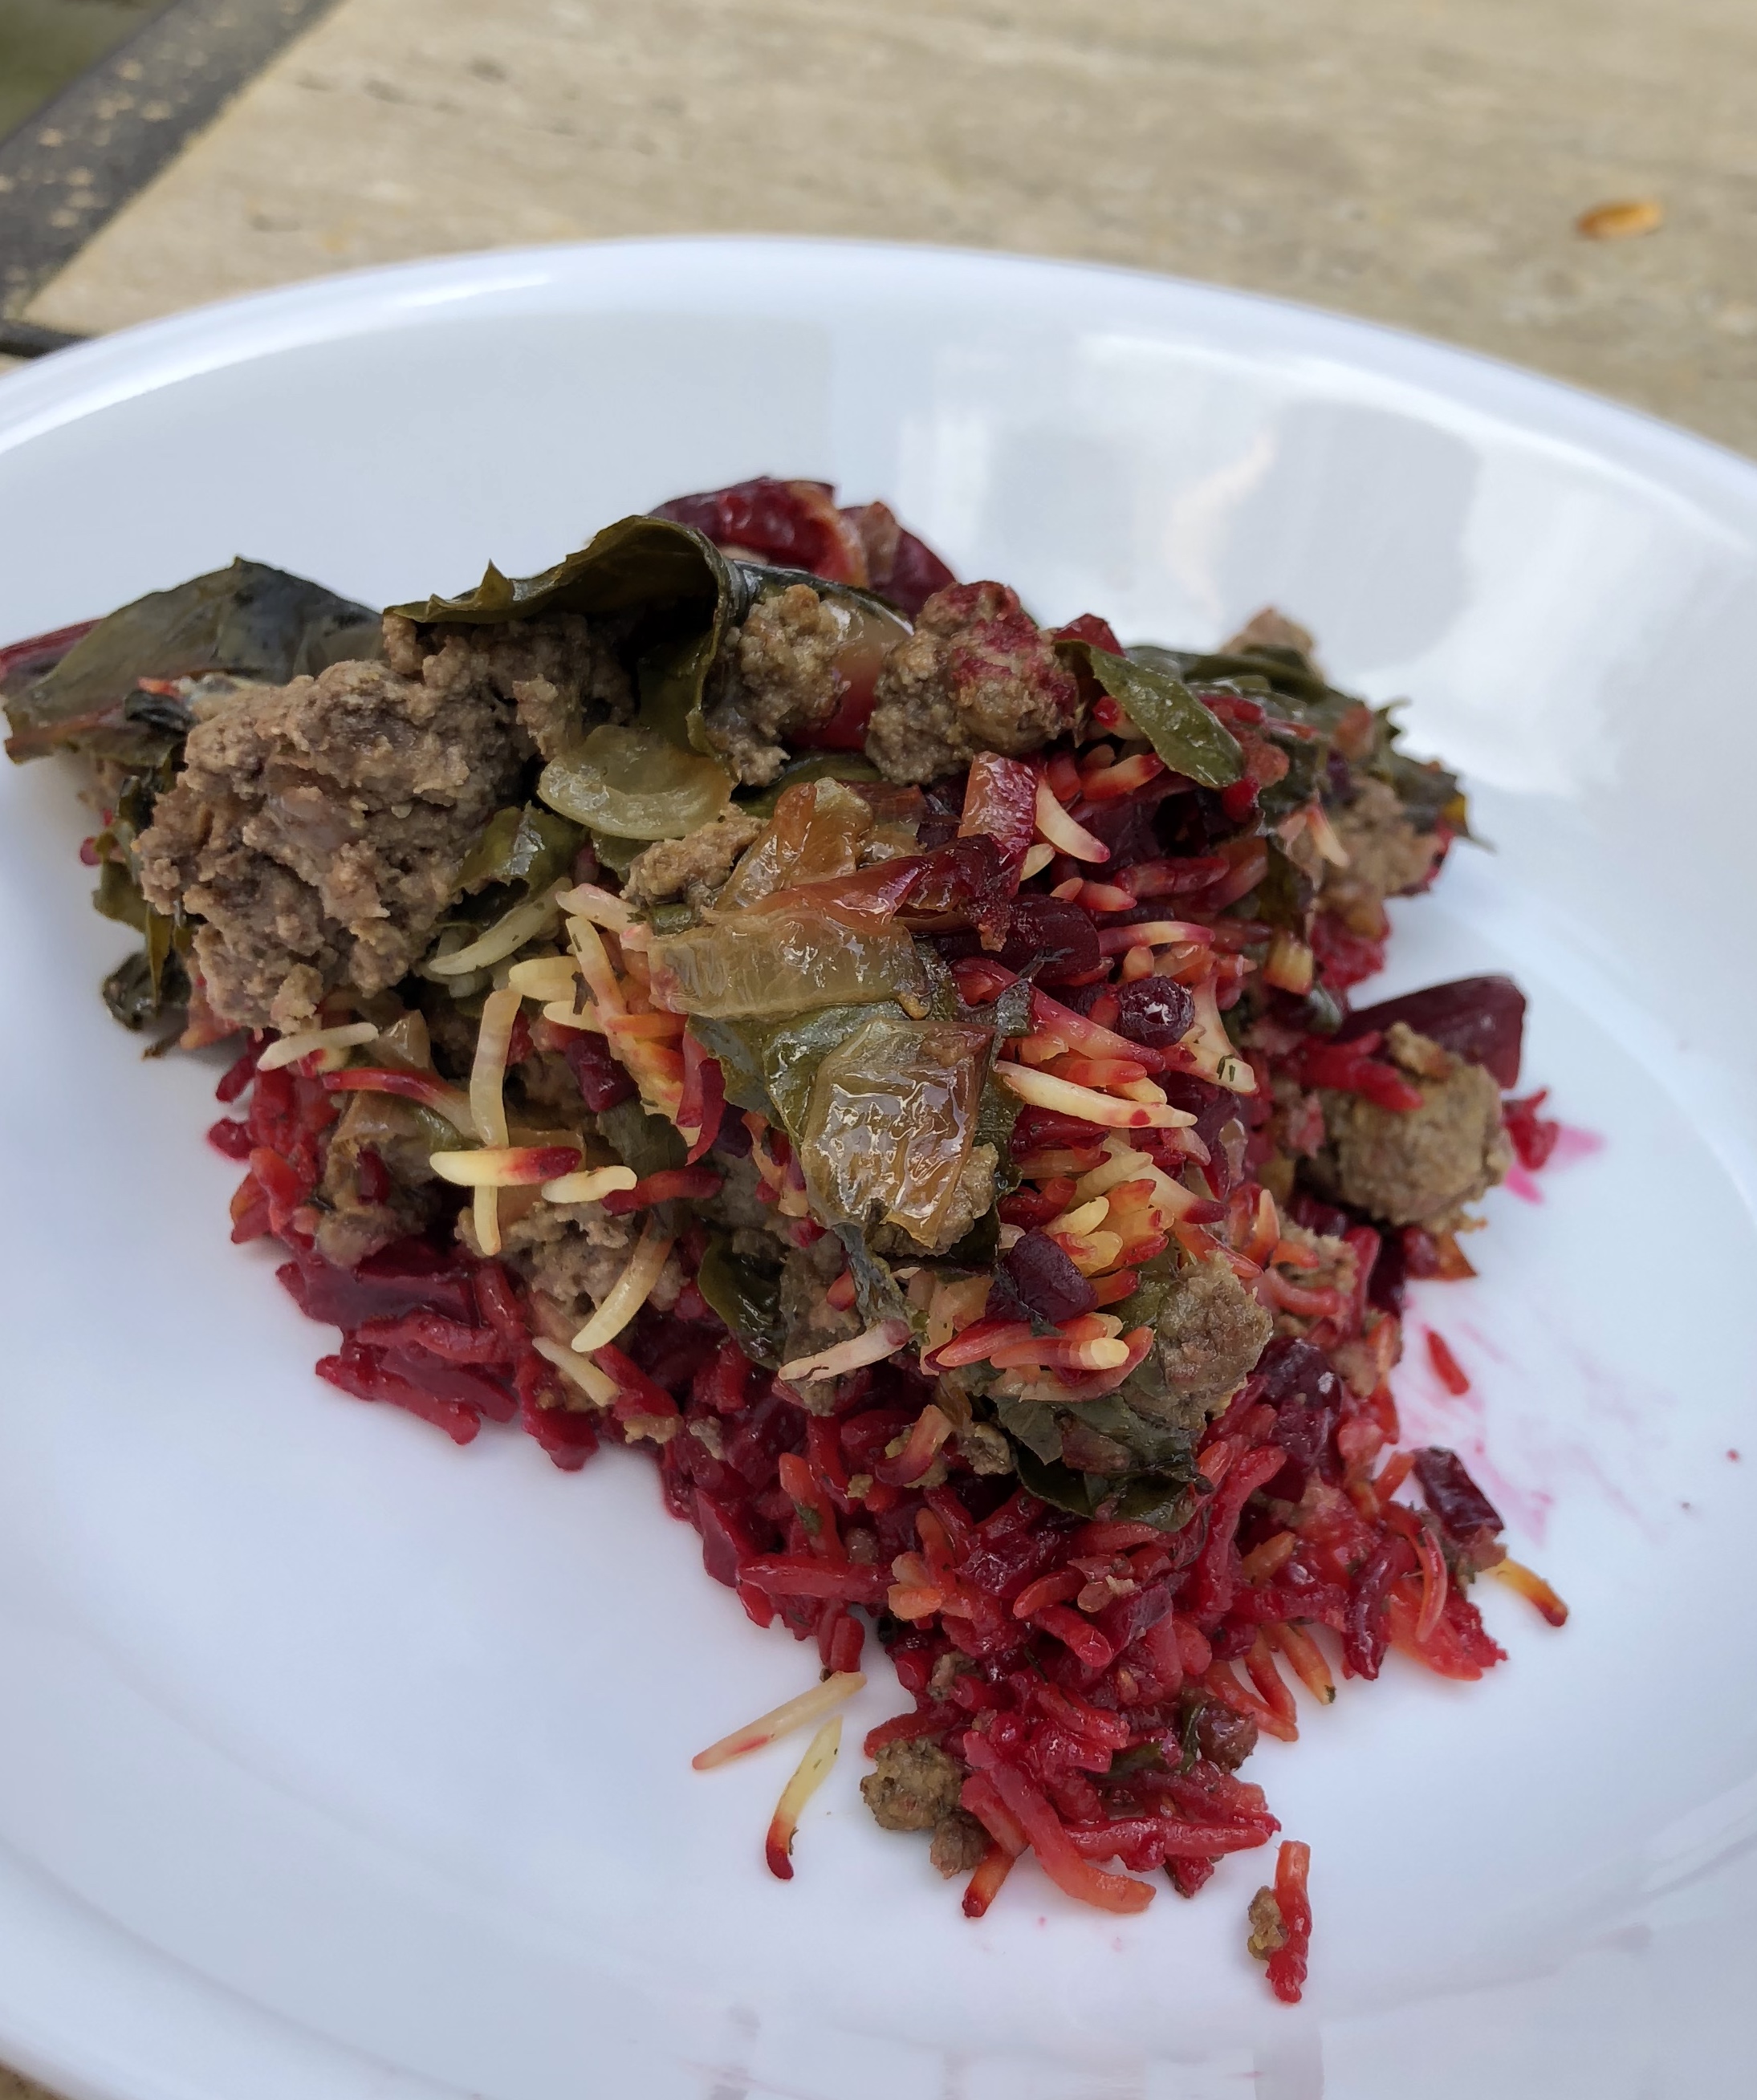 Rosh Hashanah Pilaf with Beets, Chard, and Beef from Iraqi Kurdistan Lynn A